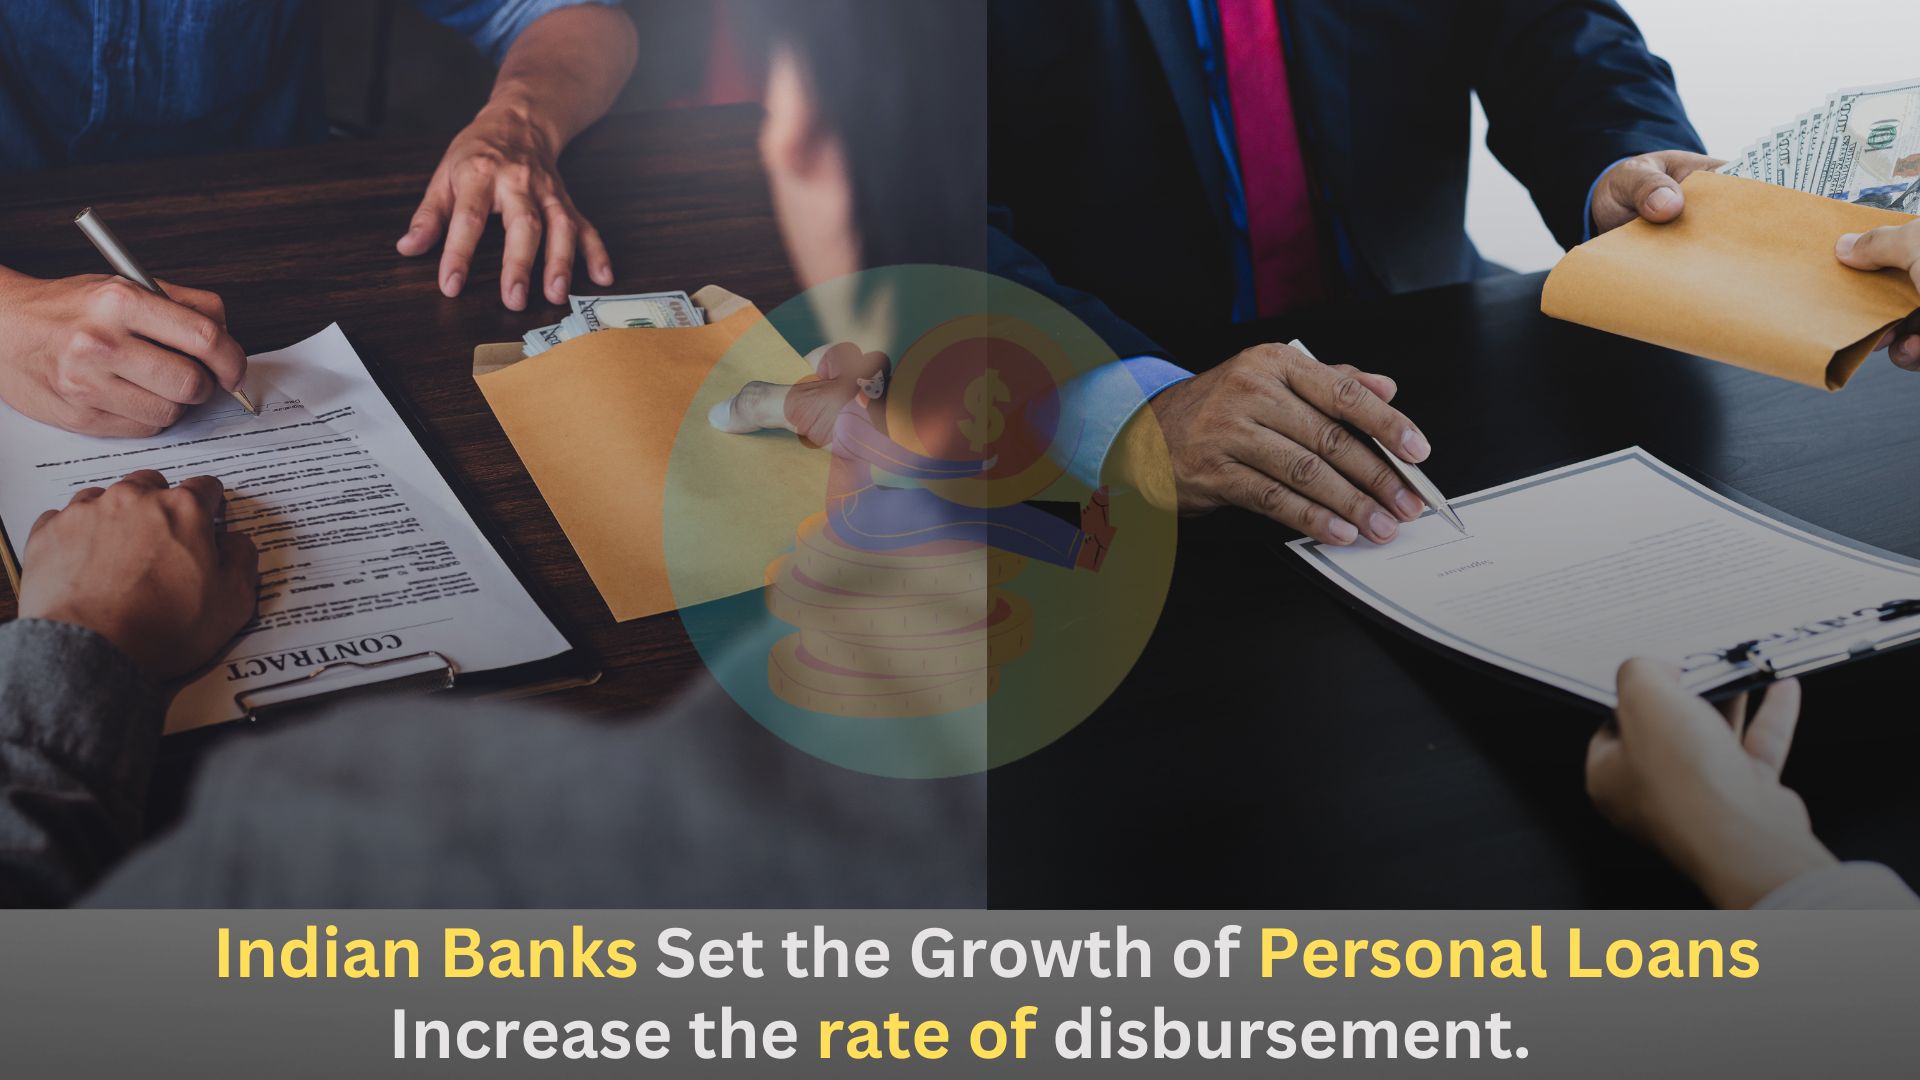 Indian Banks Set the Growth of Personal Loans,increase the rate of disbursement.